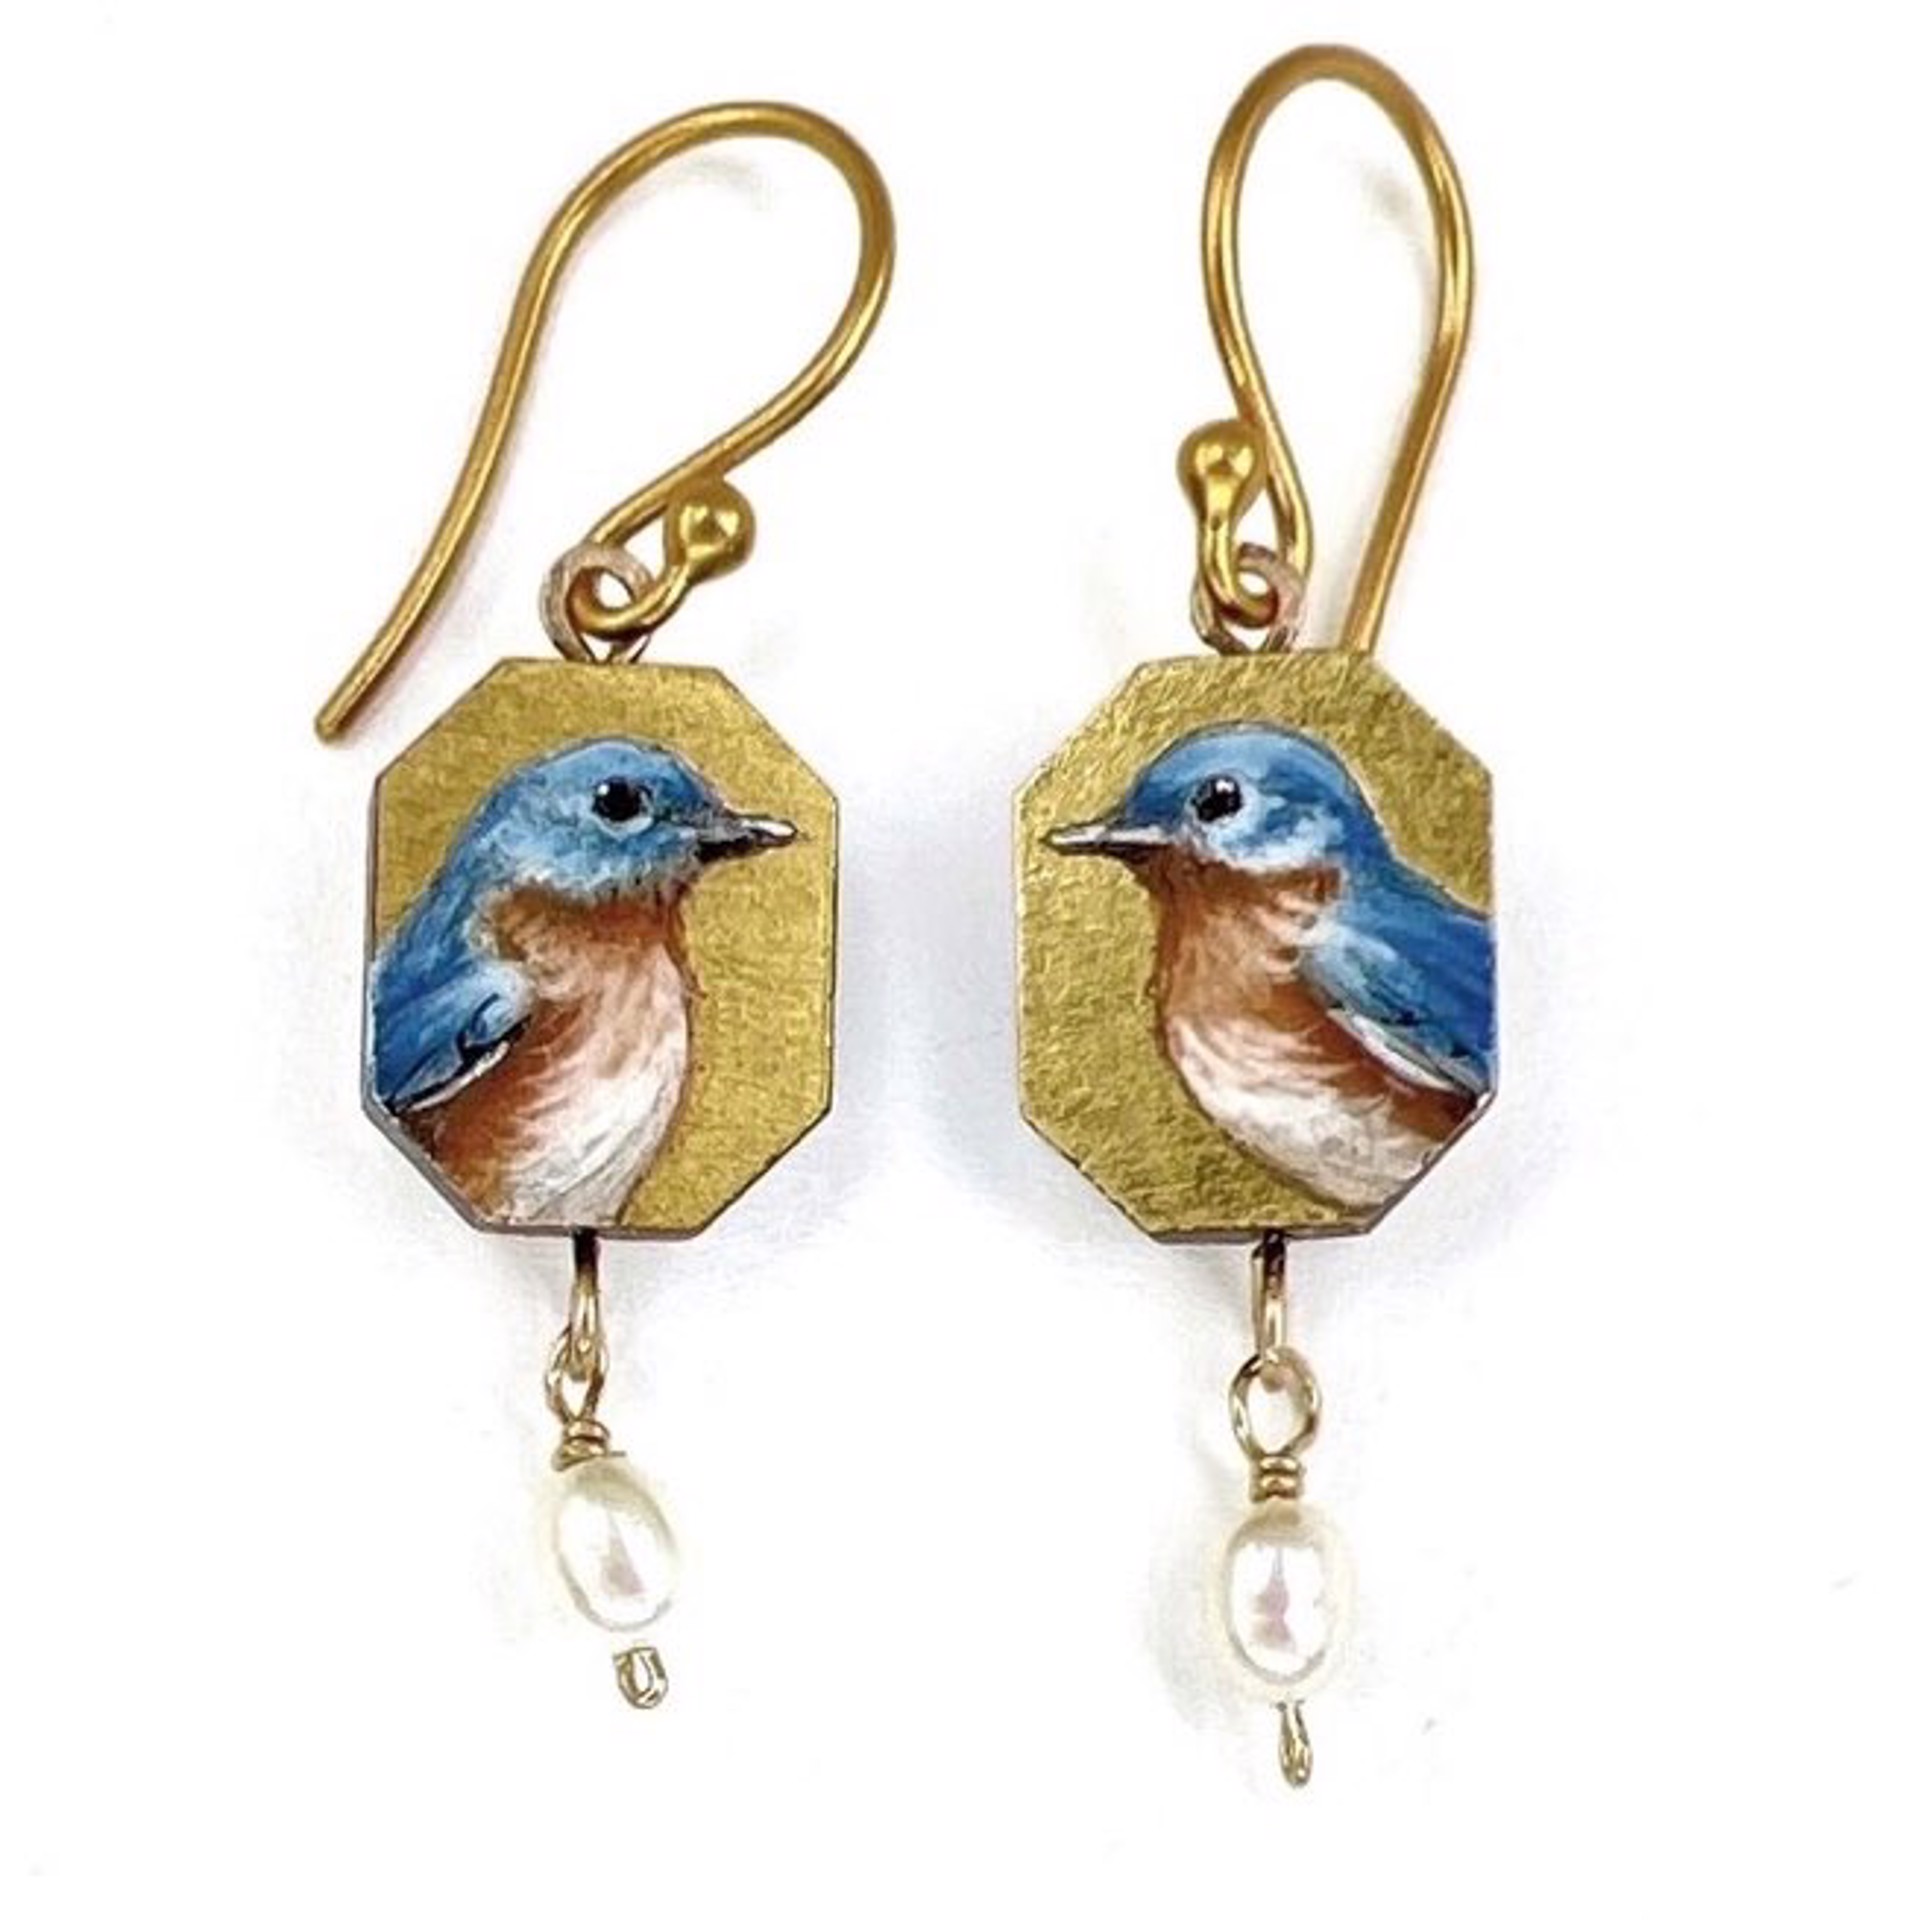 Bluebird Earrings with Pearl by Christina Goodman